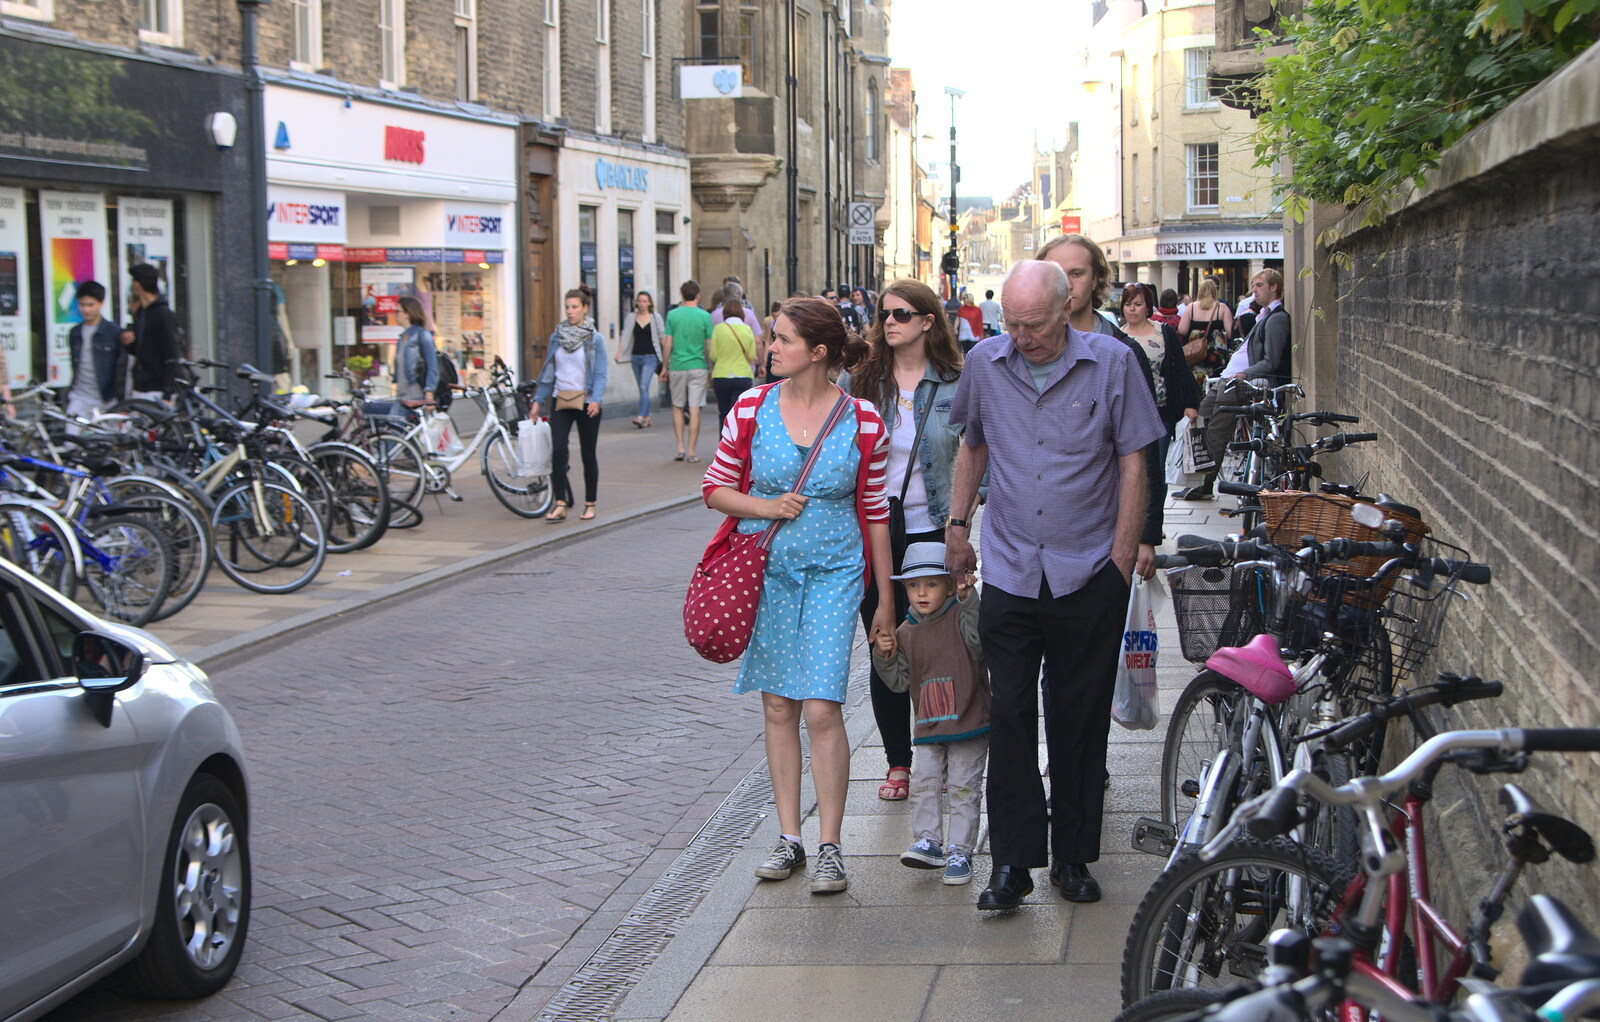 On Regent Street, heading back to the car from Punting With Grandad, Cambridge, Cambridgeshire - 6th June 2015